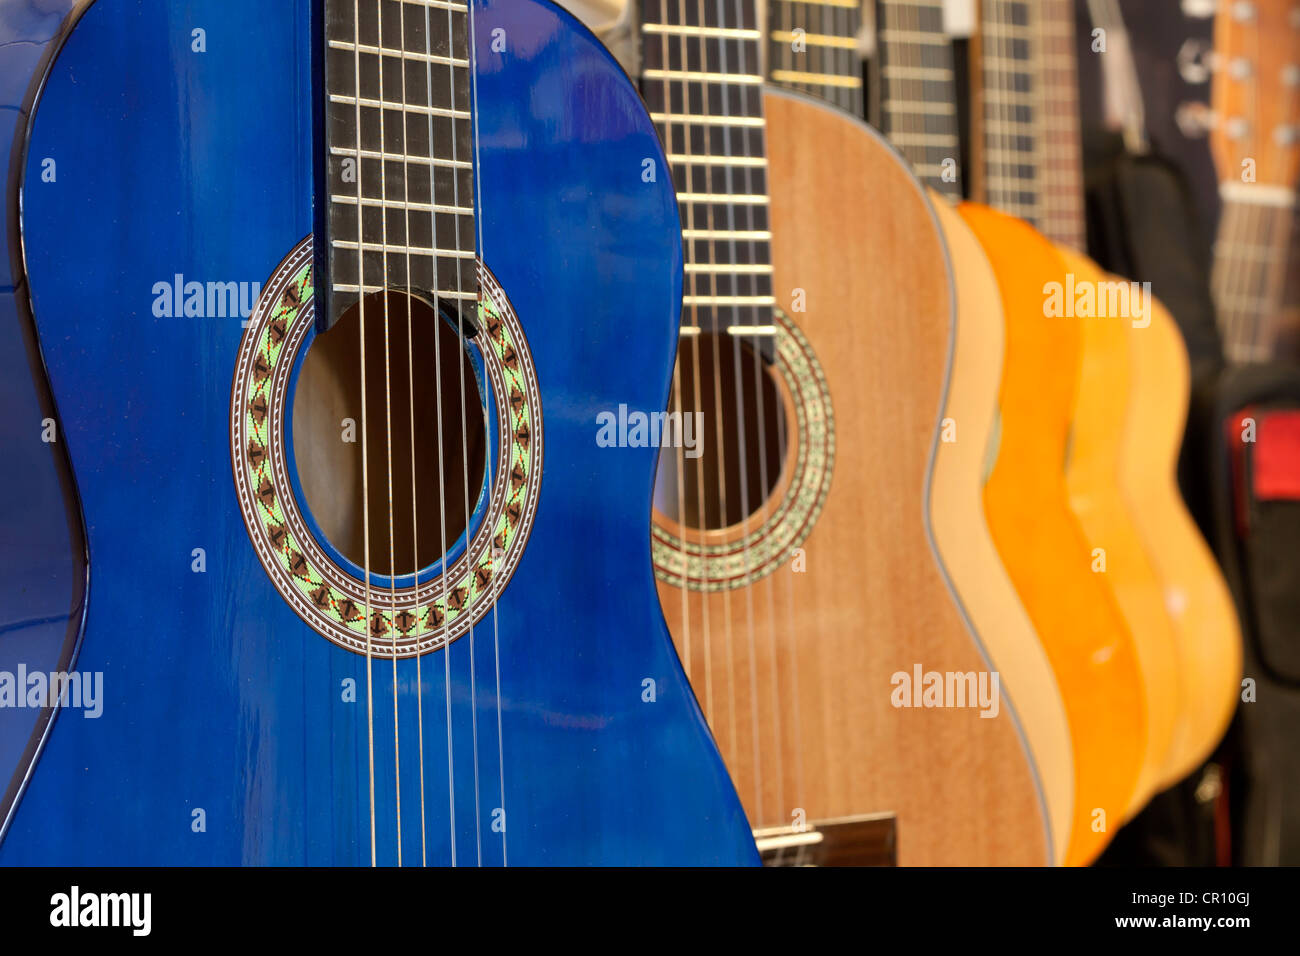 guitars in the store abstract background blur Stock Photo